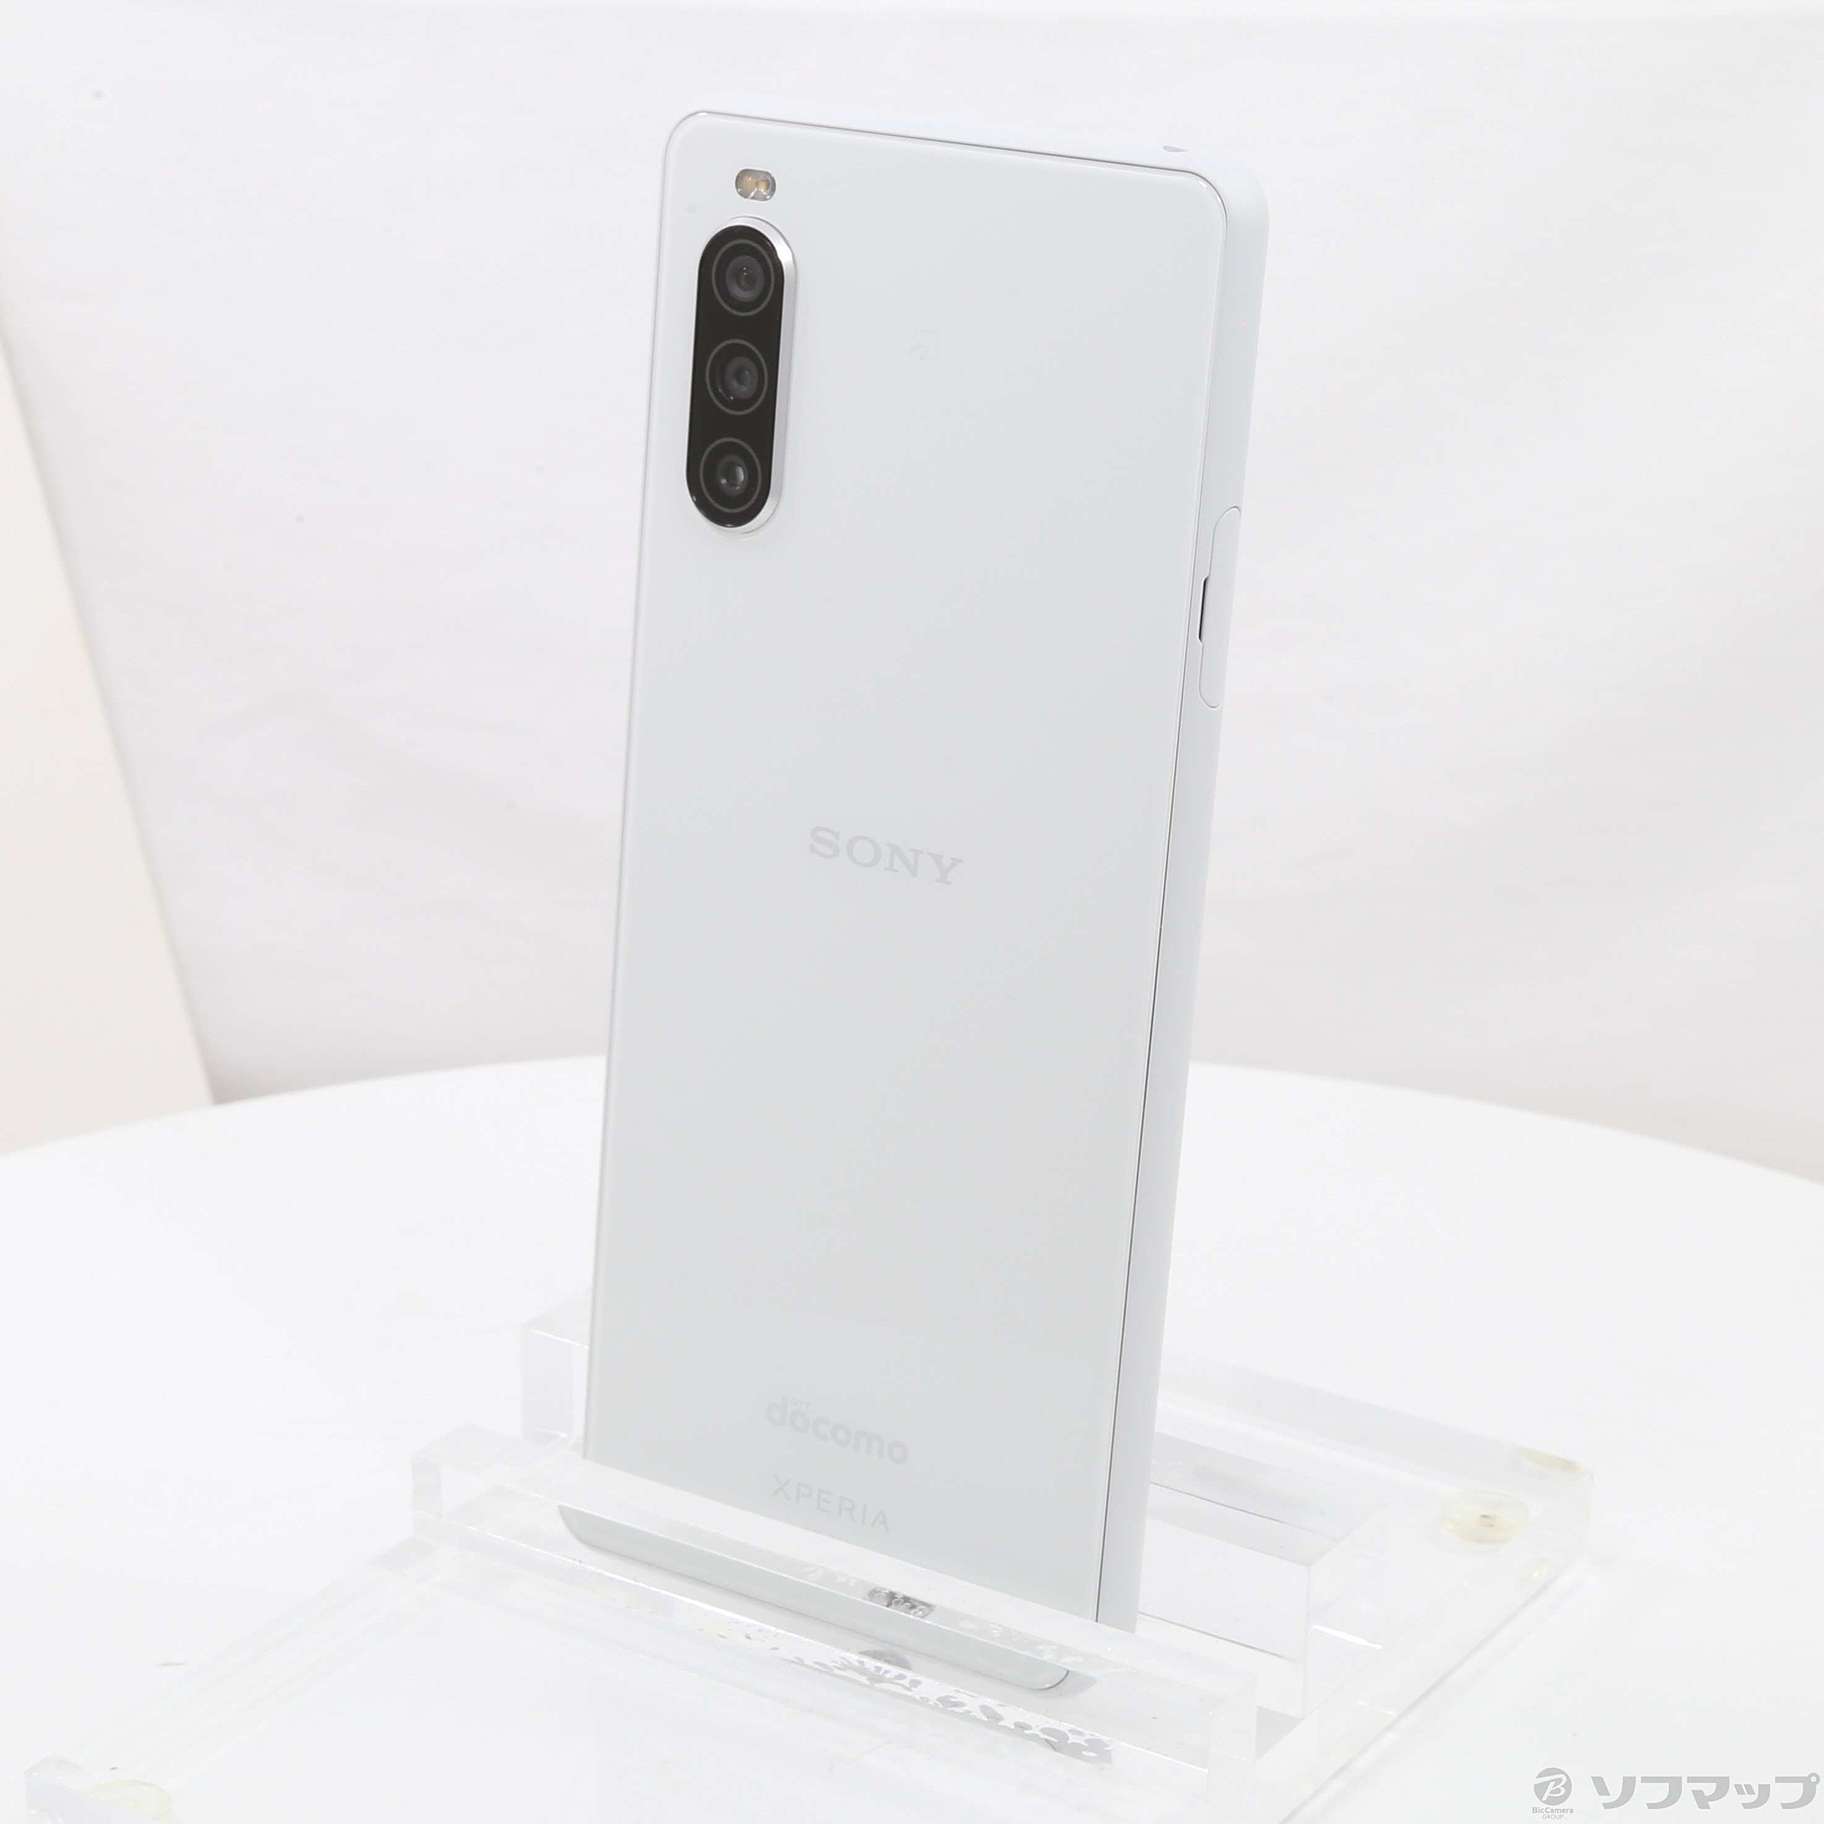 OUTLET 包装 即日発送 代引無料 SONY Xperia 10 II SO-41A ホワイト 